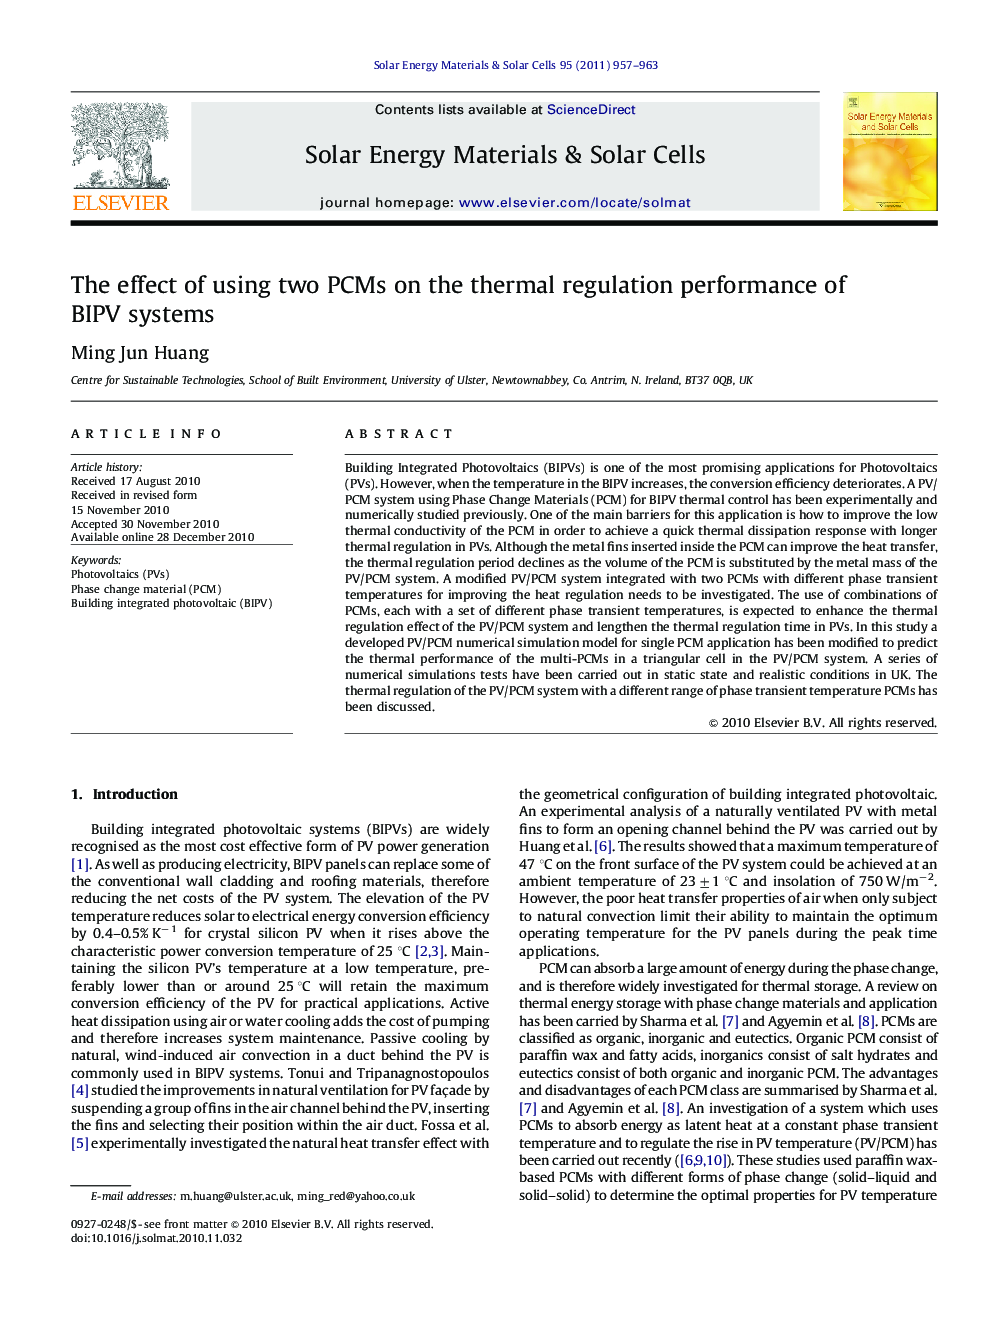 The effect of using two PCMs on the thermal regulation performance of BIPV systems